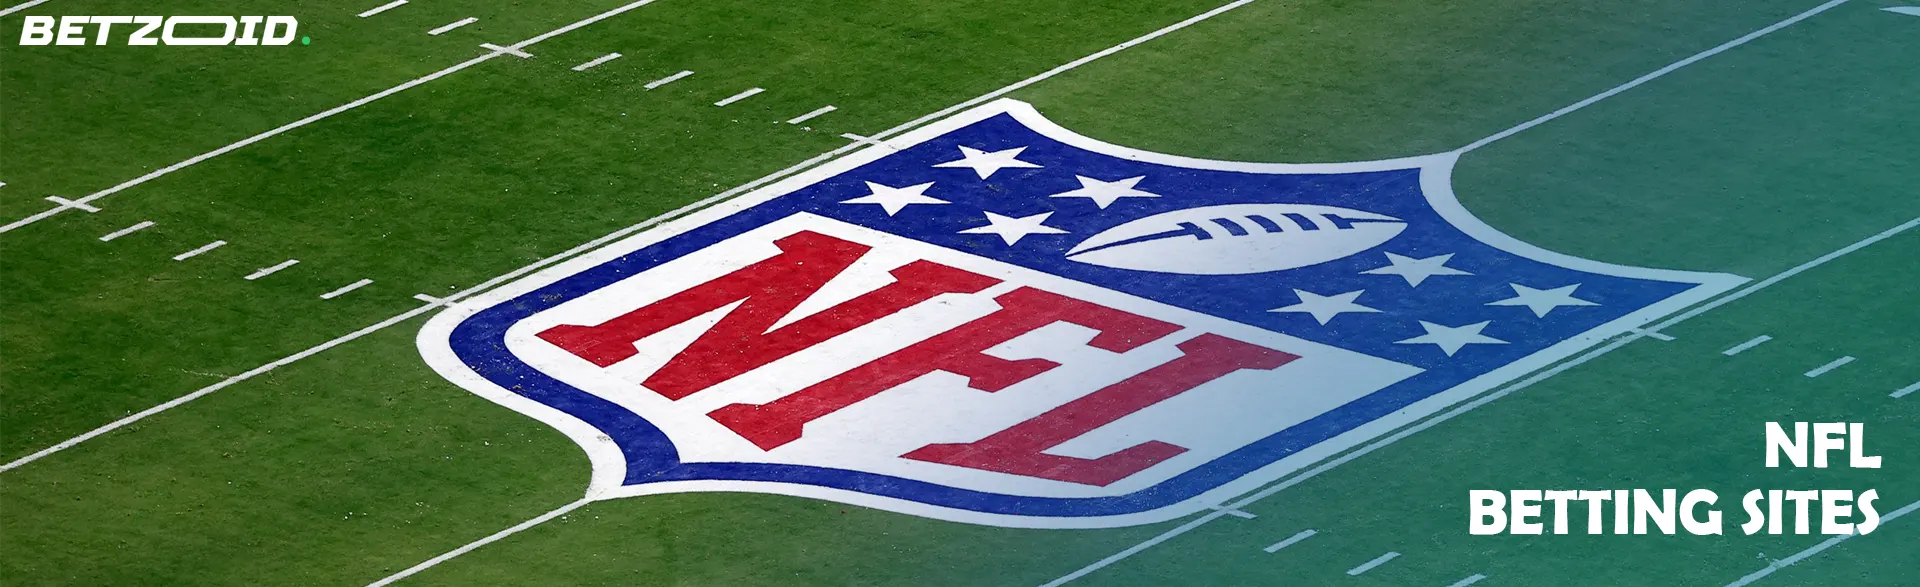 NFL logo on a football field, representing NFL betting sites in Canada for fans and bettors looking for the best platforms to place their wagers.